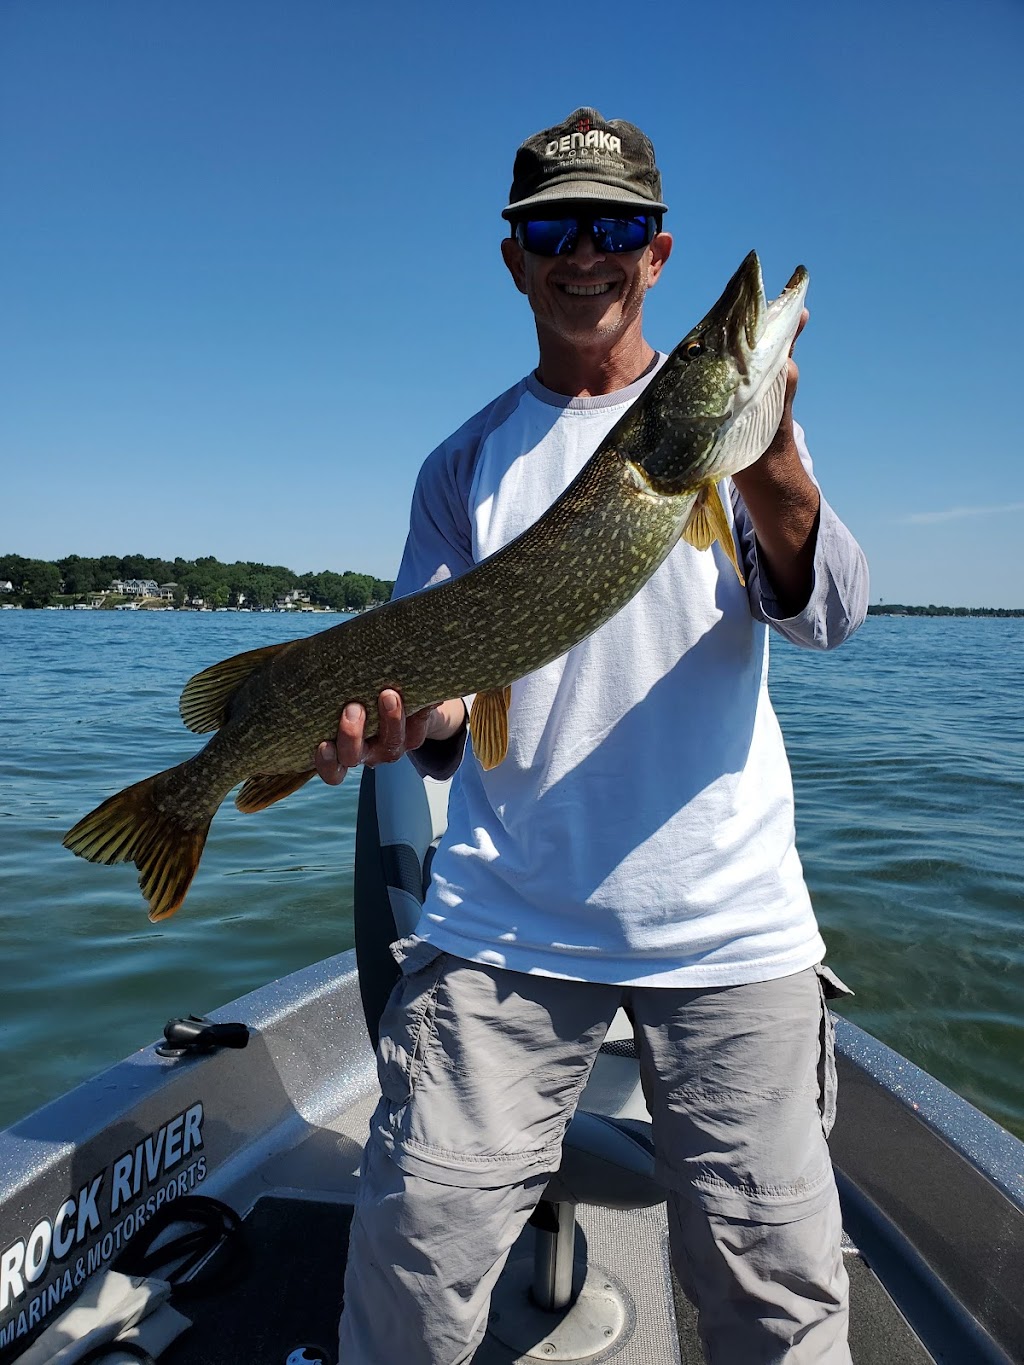 Fishingthrills Guide Service | 5920 S Emerson Rd, Beloit, WI 53511, USA | Phone: (608) 921-8980